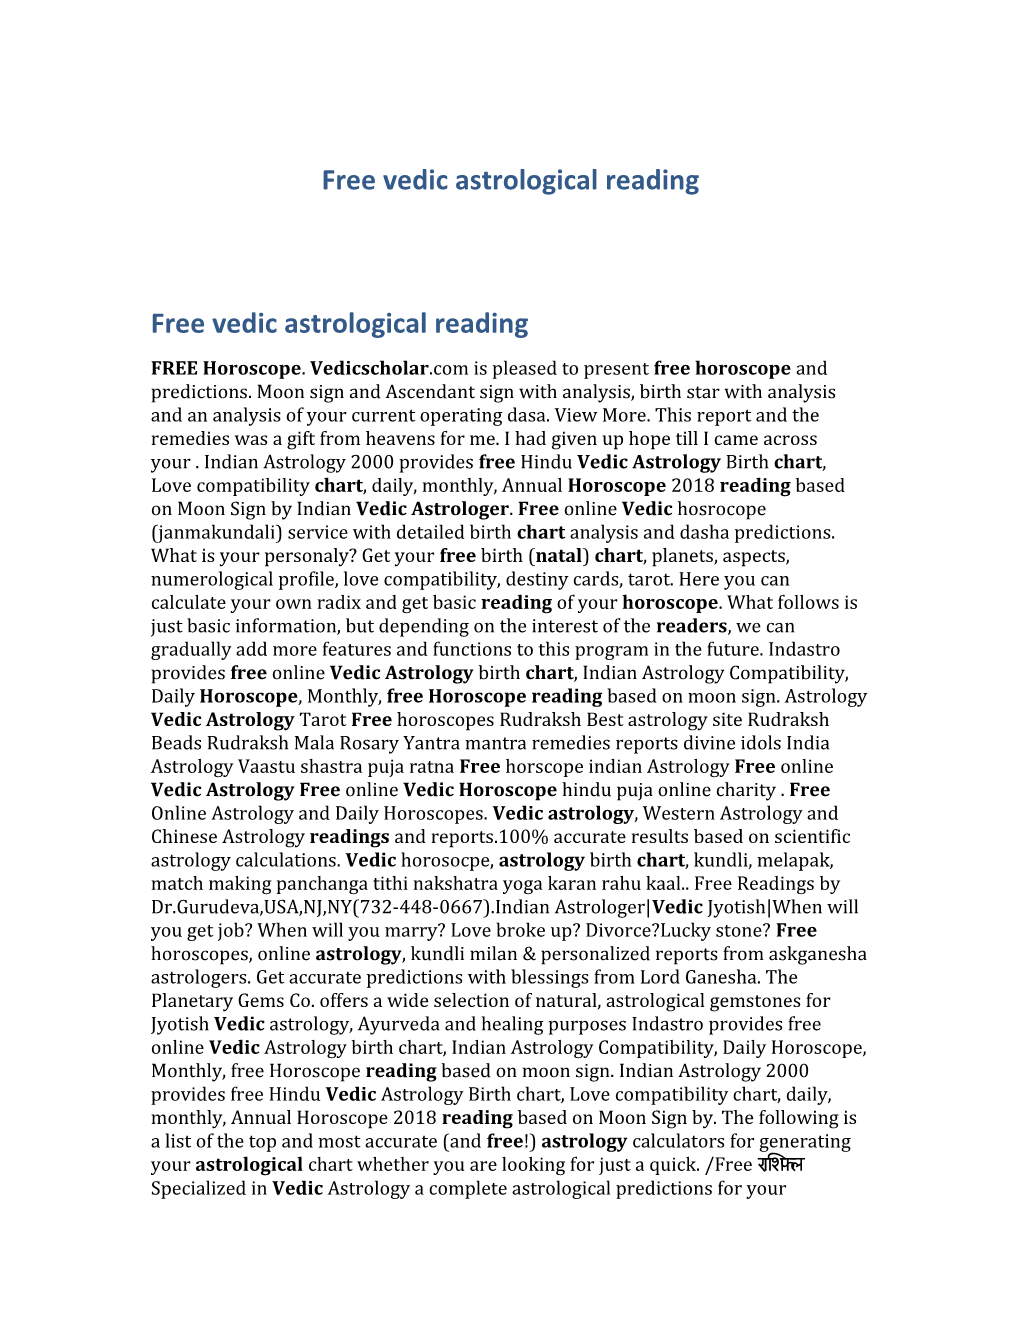 Free Vedic Astrological Reading